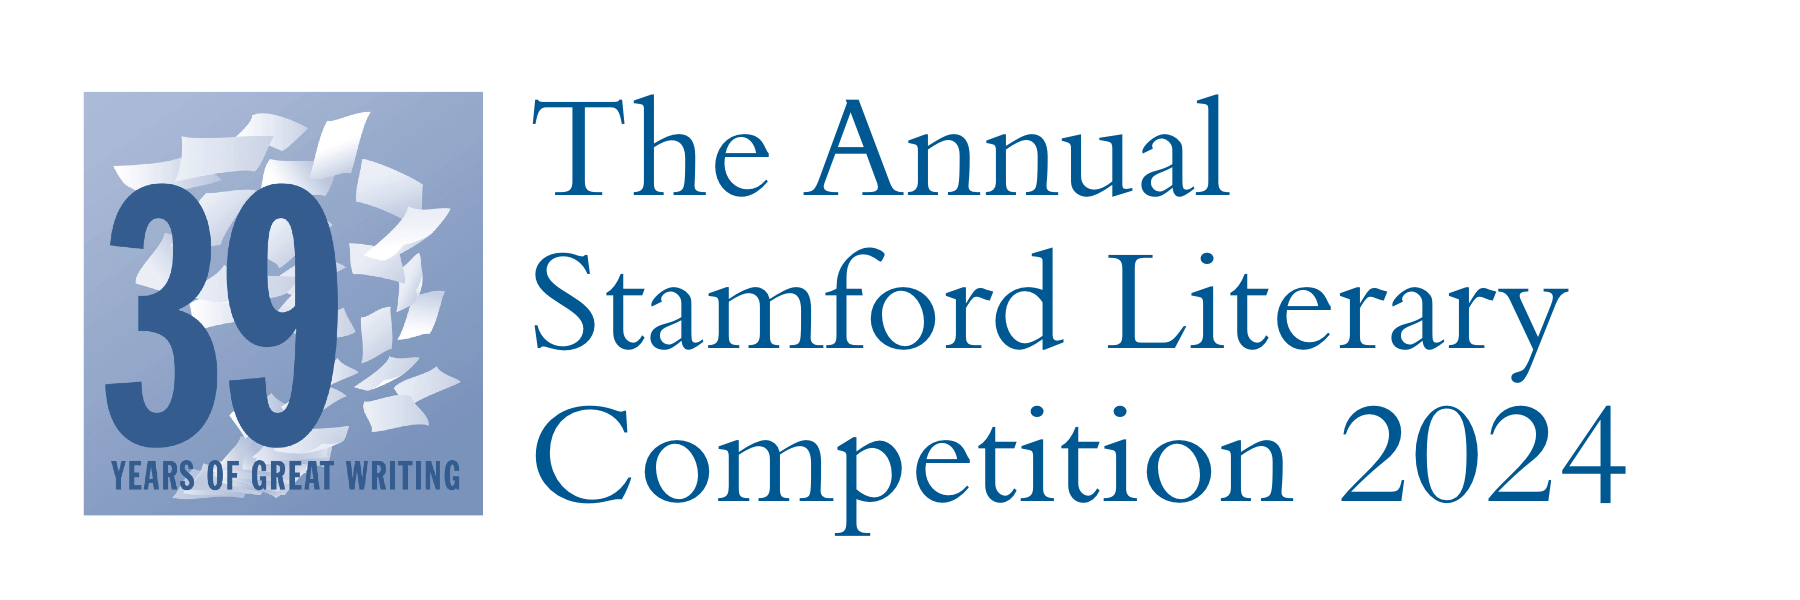 The Annual Stamford Literary Competition 2024